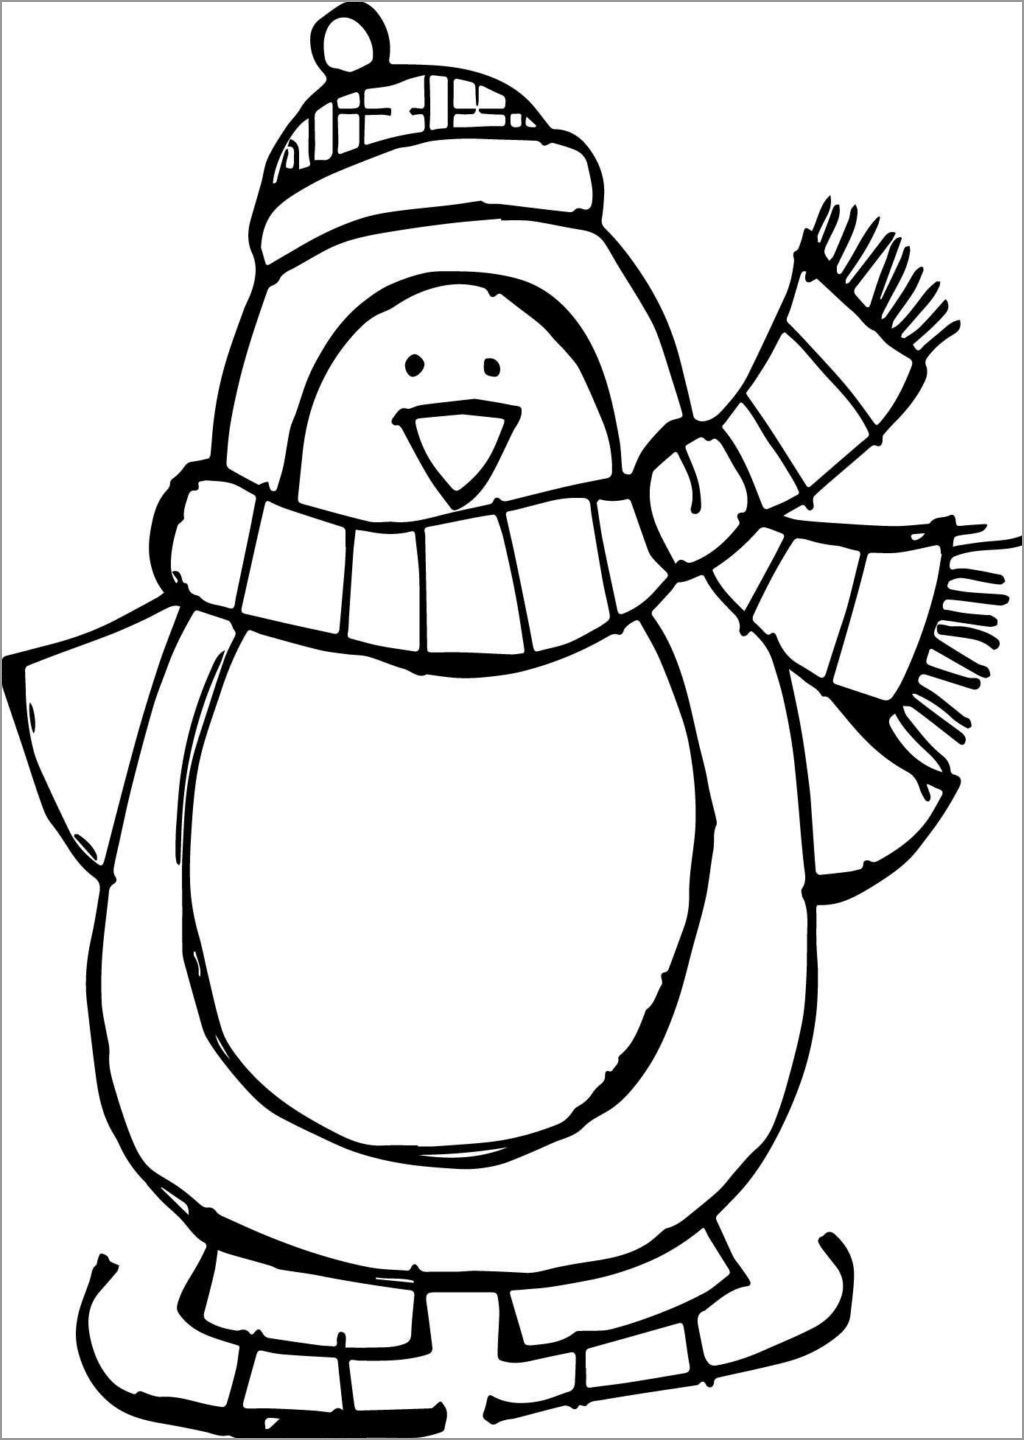 Cute Christmas Penguin Coloring Page   ColoringBay